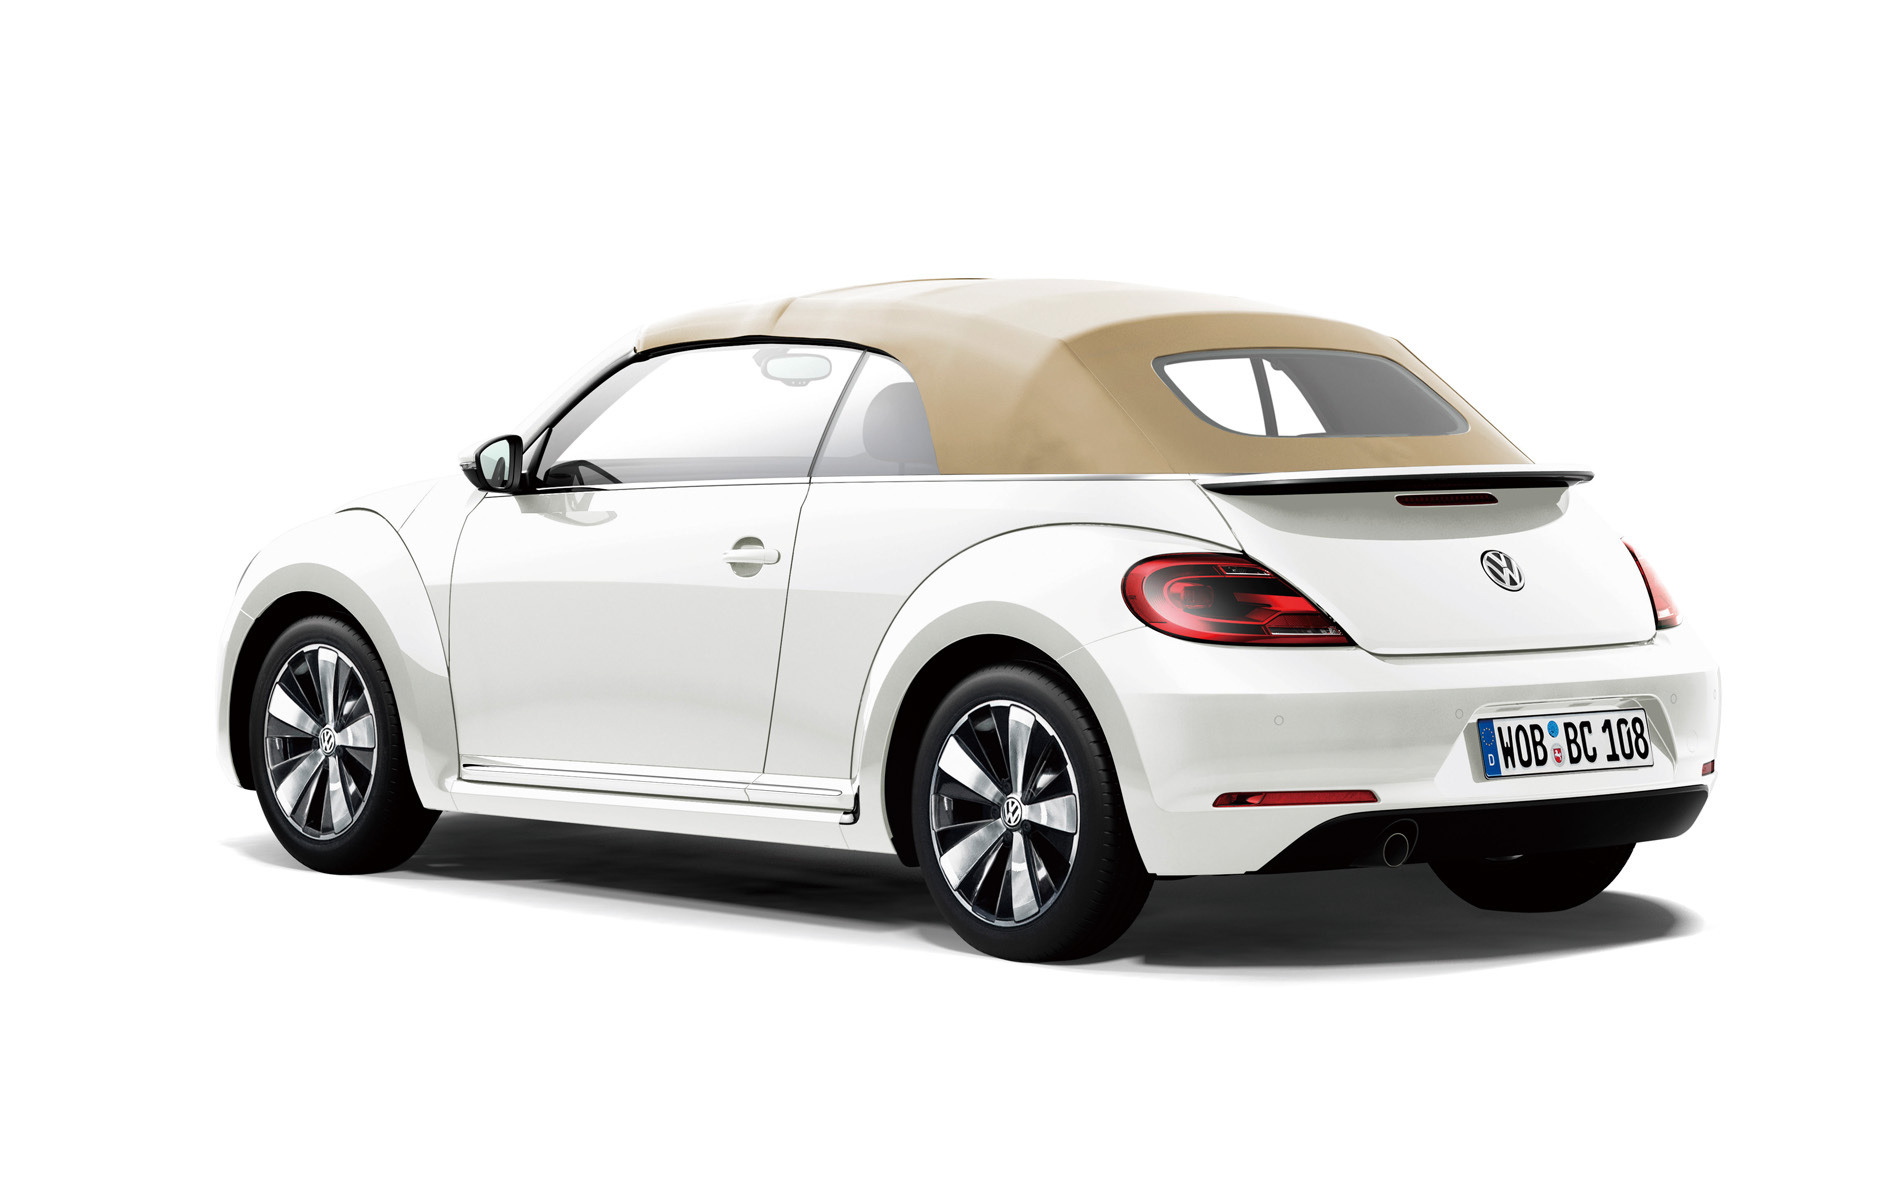 The Beetle Turbo Exclusive Cabriolet Exclusive 10 画像 ドイツの最上級仕様 ザ ビートル ターボ ザ ビートル カブリオレ エクスクルーシブ が特別仕様車として登場 Clicccar Com